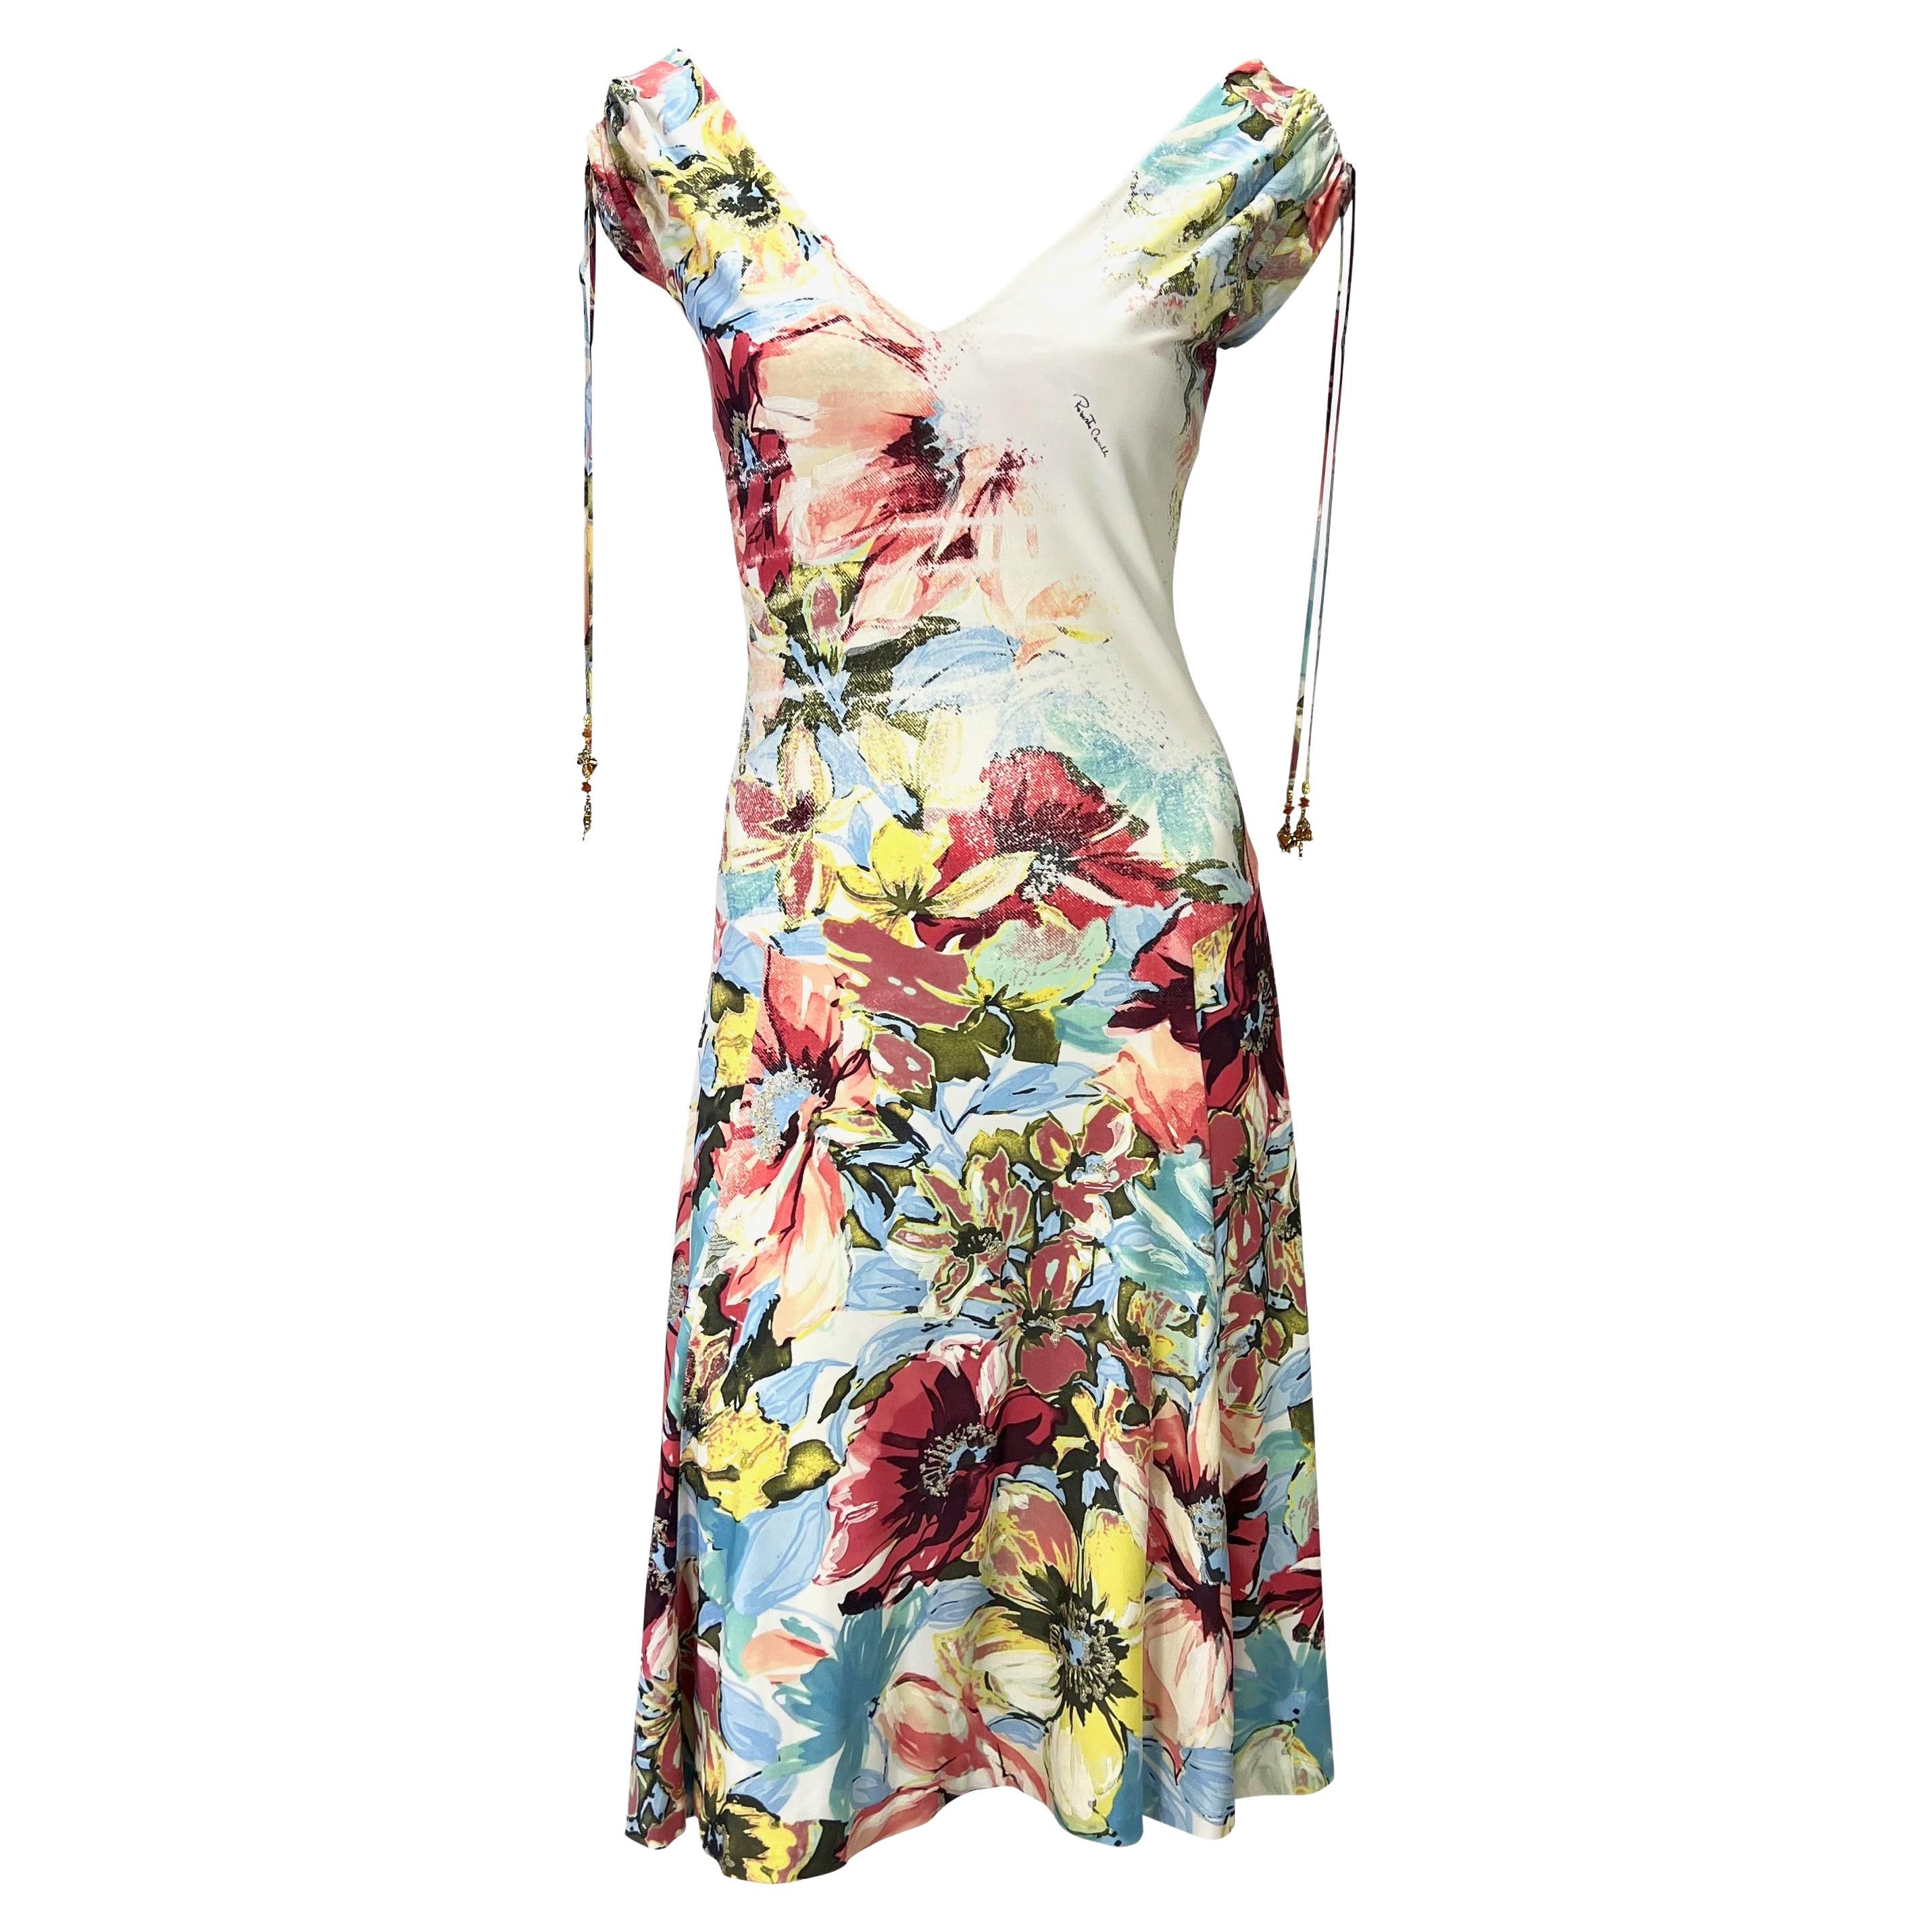 S/S 2003 Roberto Cavalli Floral Abstract Watercolor Viscose Stretch Charm Dress